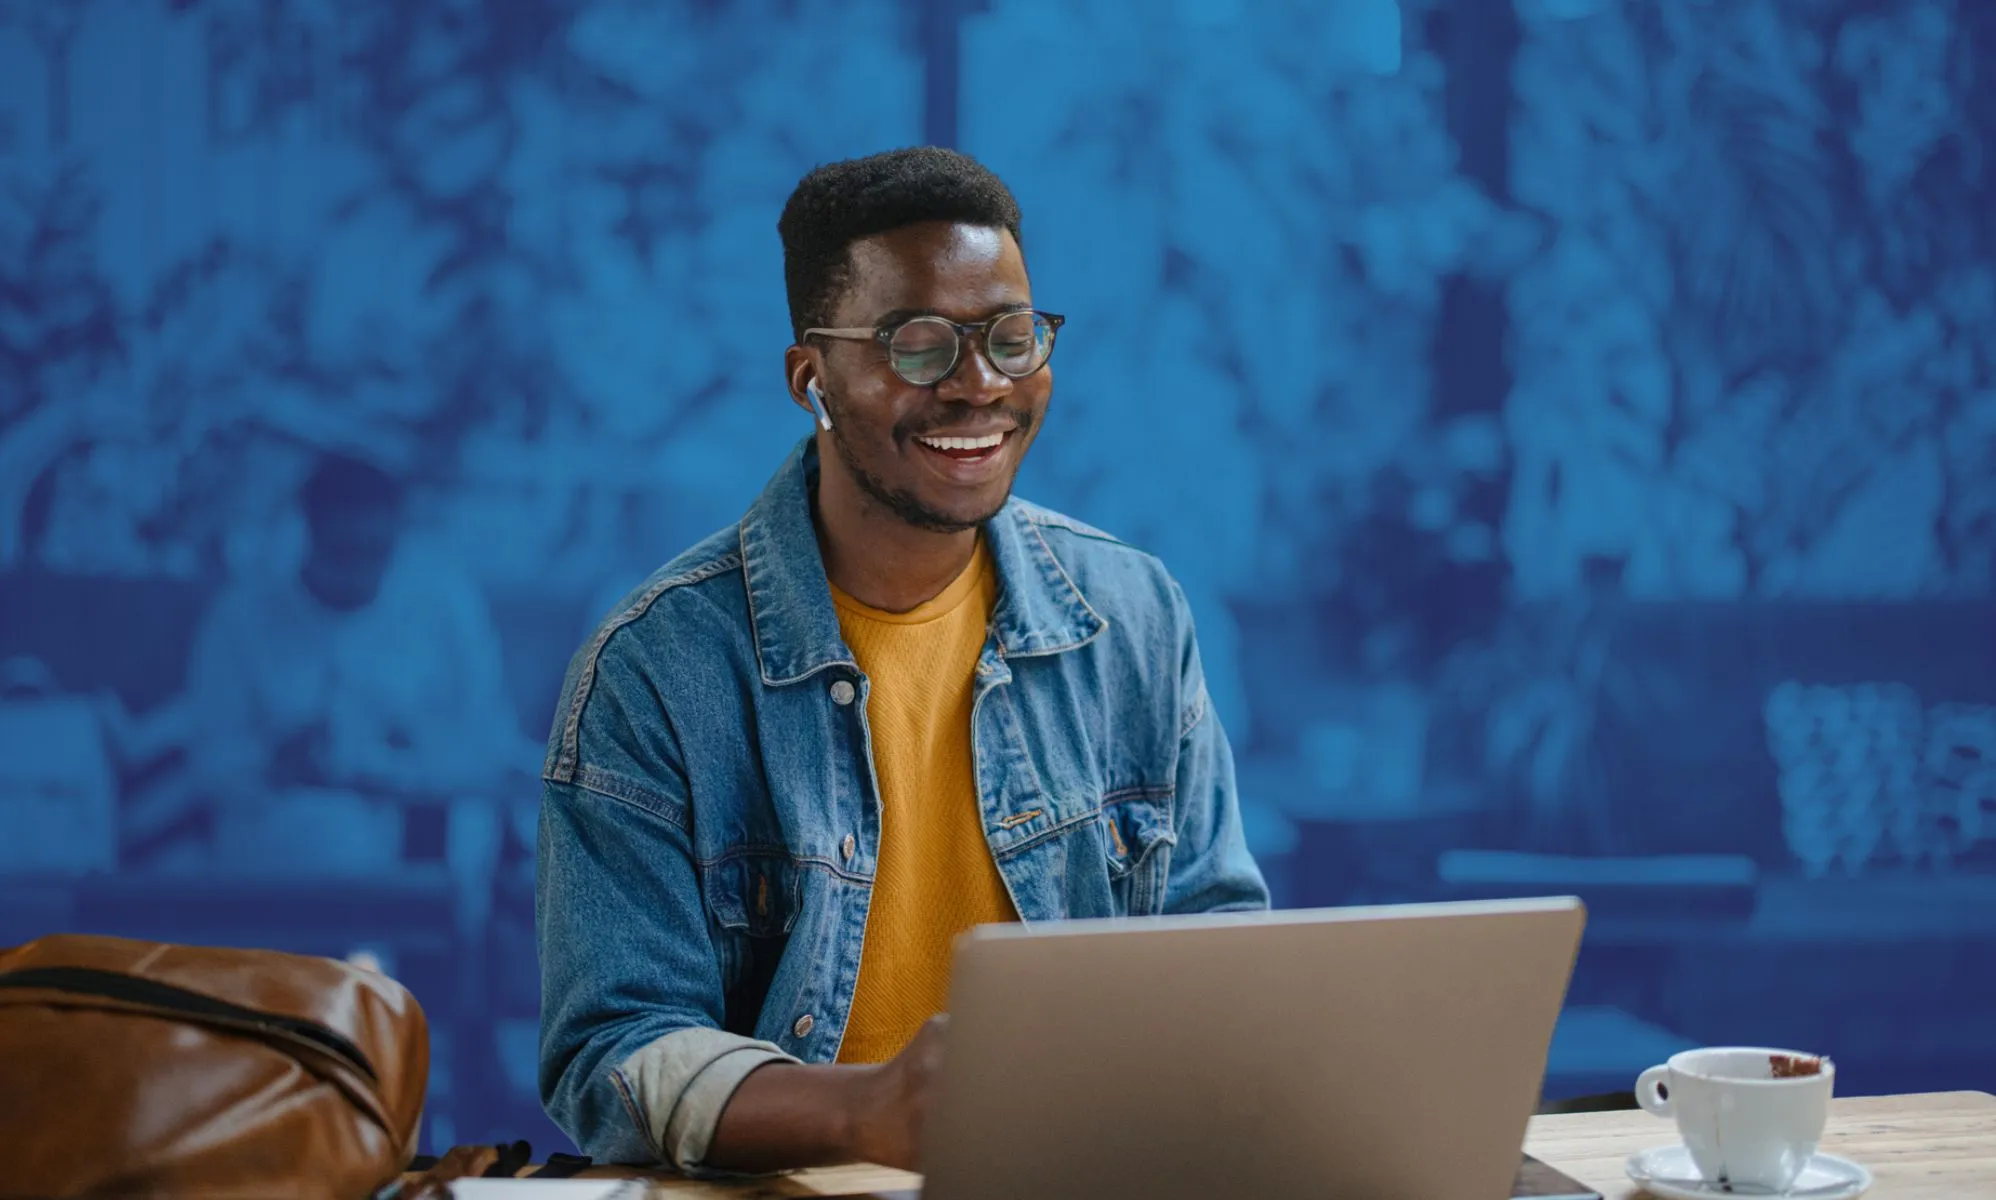 How to get more Black Gen Z talent into your workplace and – importantly – keep them there